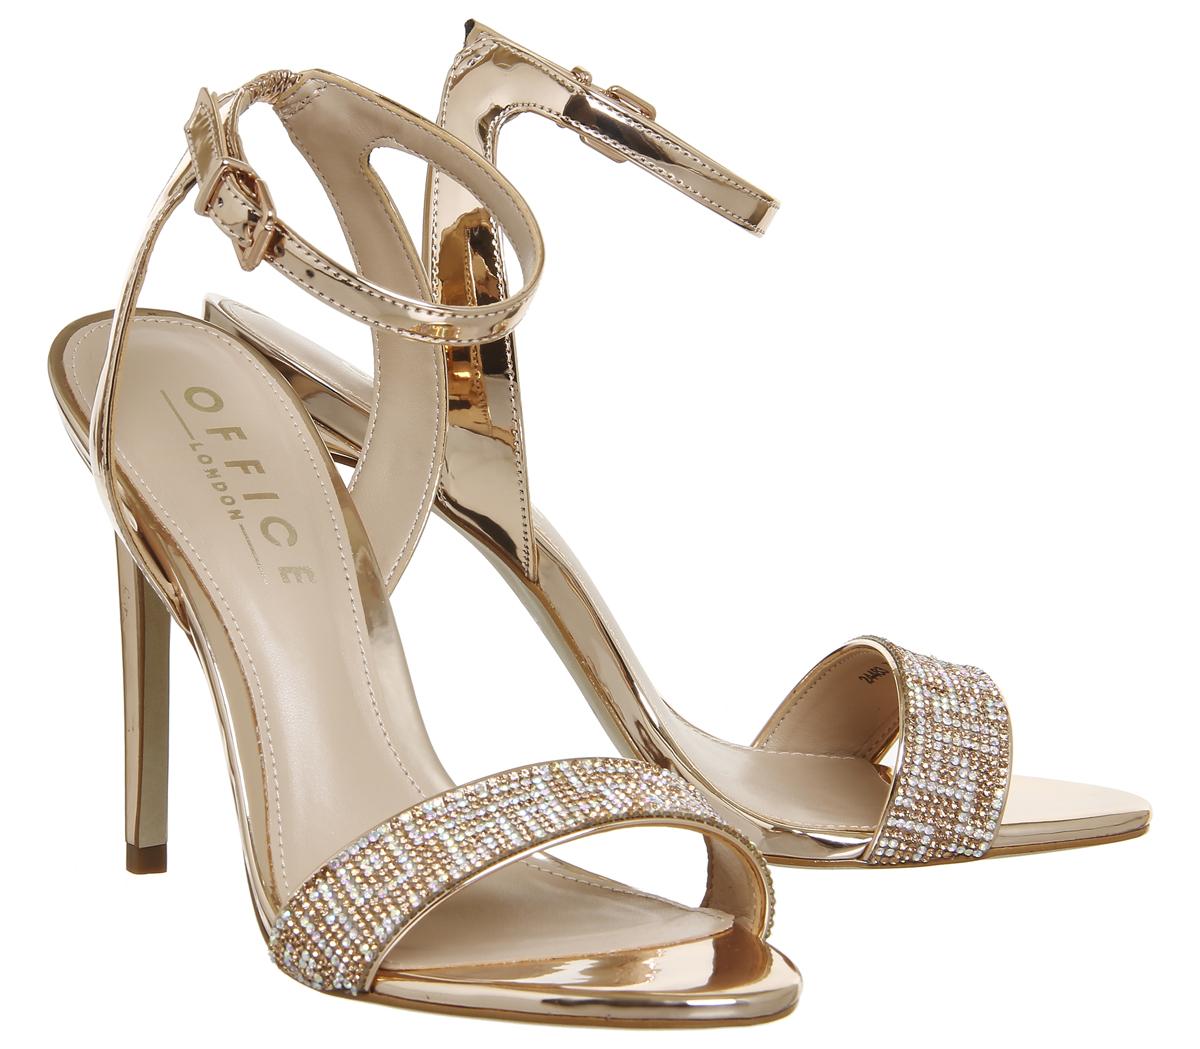 OFFICE Alana Single Sole Sandals Rose Gold With Diamante Trim - High Heels